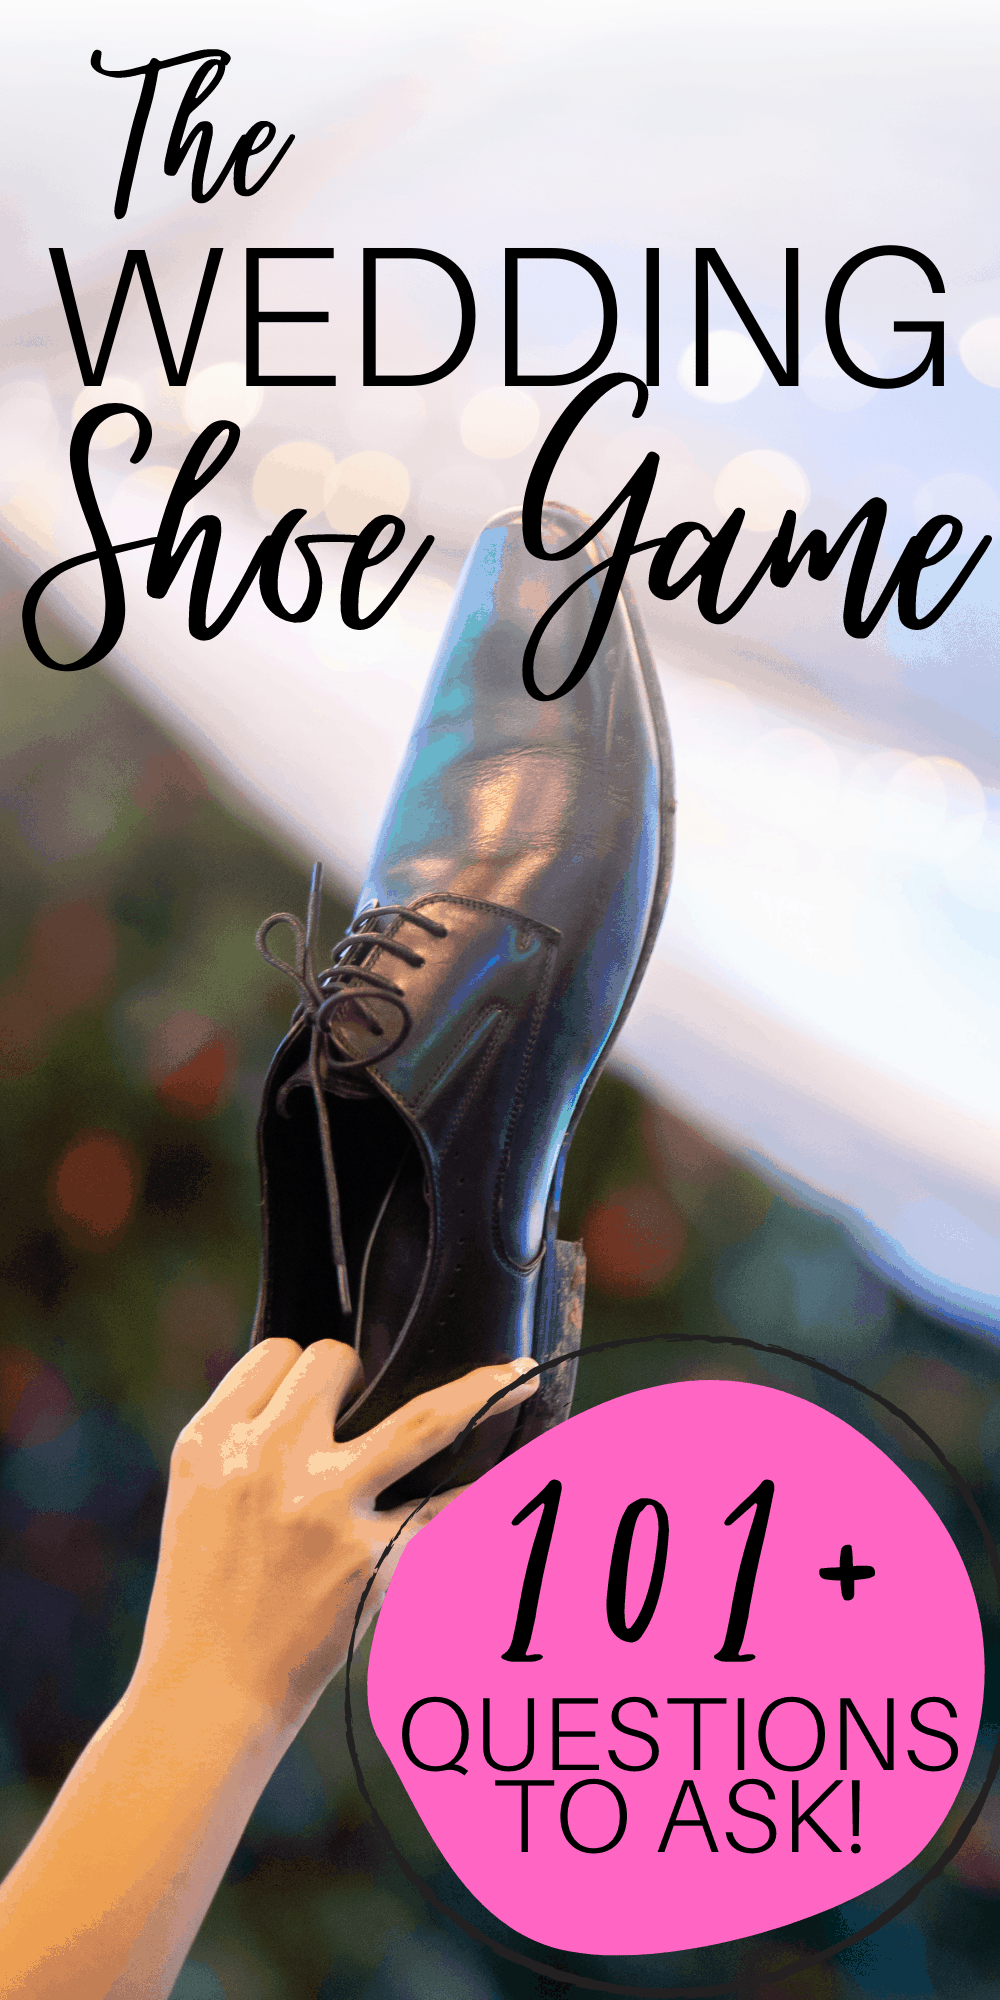 The Wedding Shoe Game: 200+ Questions To Ask